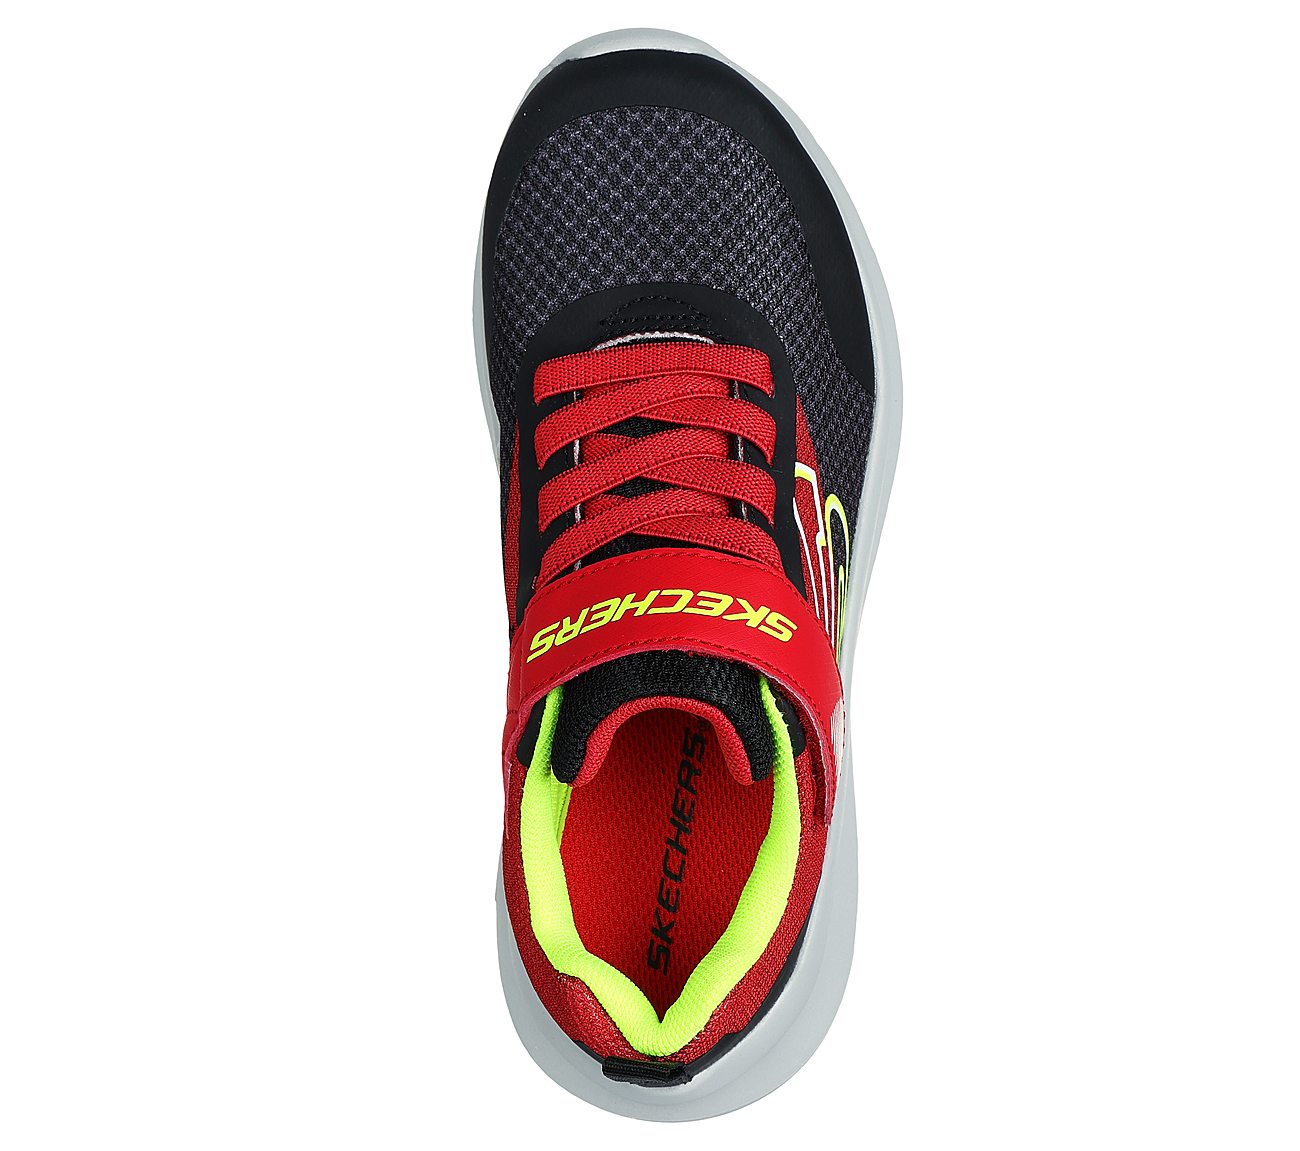 SKECH FAST - SOLAR-SQUAD, RED/BLACK Footwear Top View